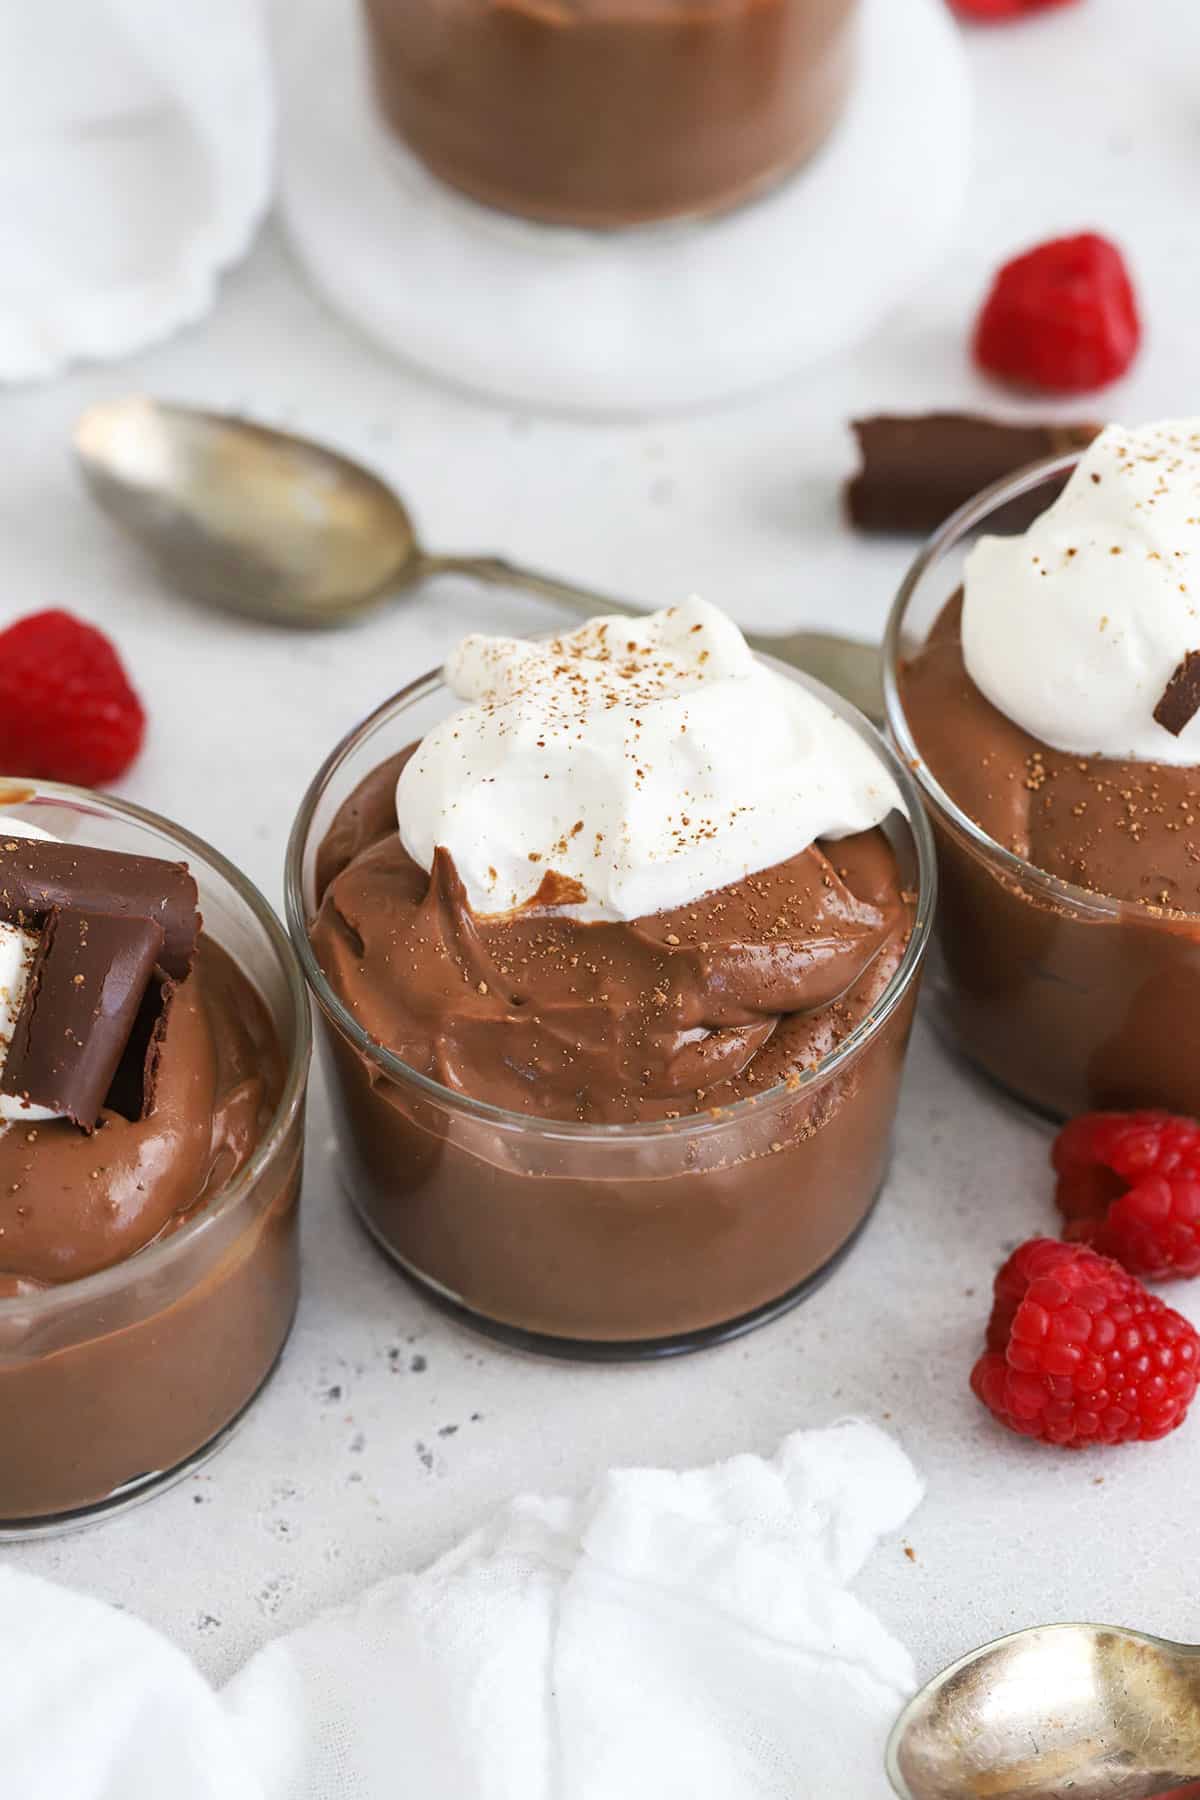 homemade gluten-free chocolate pudding topped with whipped cream